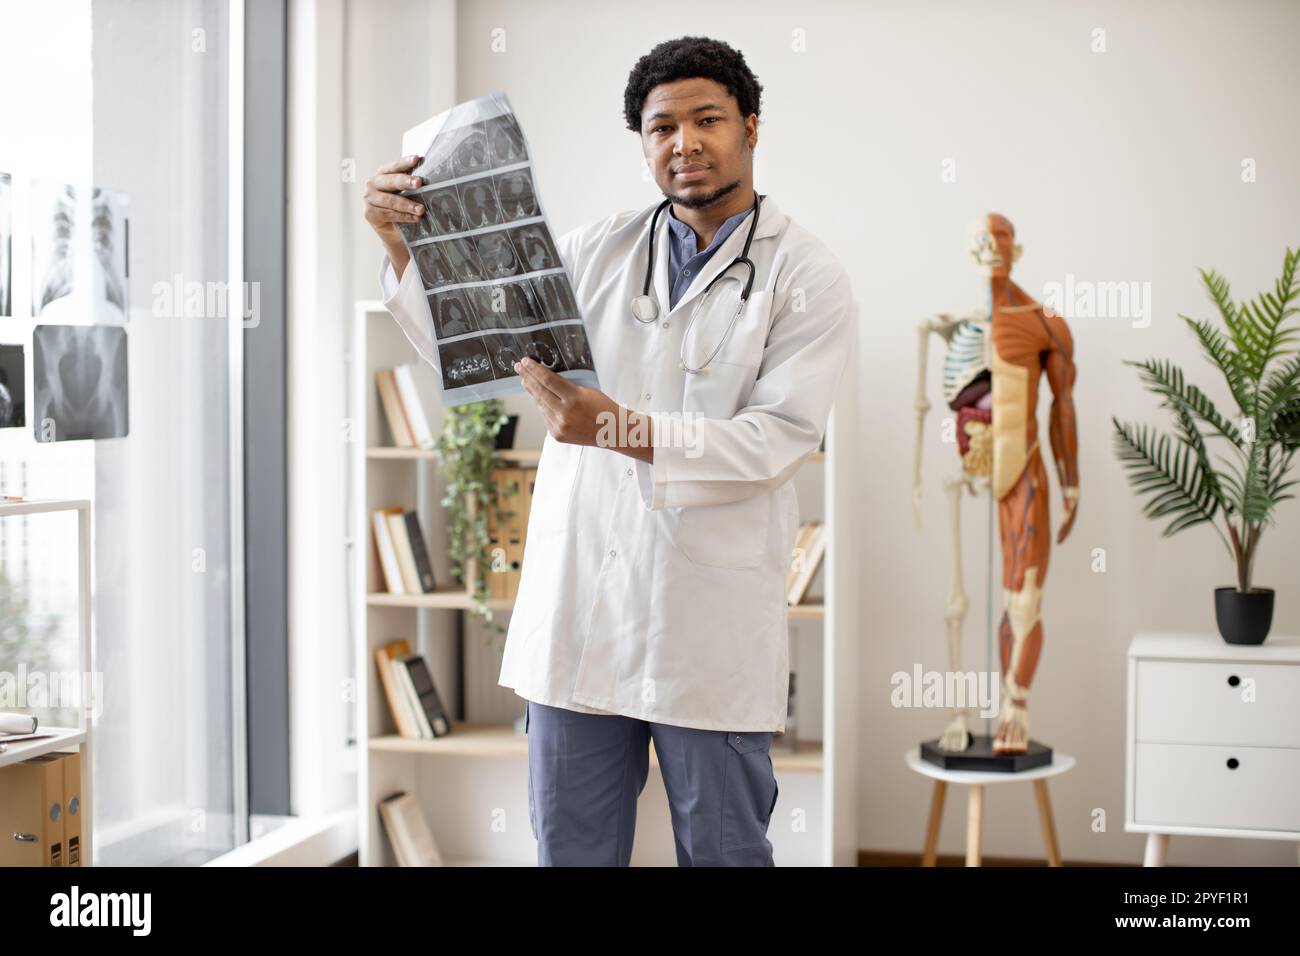 Serious multiracial adult wearing white coat and stethoscope studying CT brain scans while working in doctor's office interior. Mindful healthcare practitioner deciding on correct treatment plan. Stock Photo